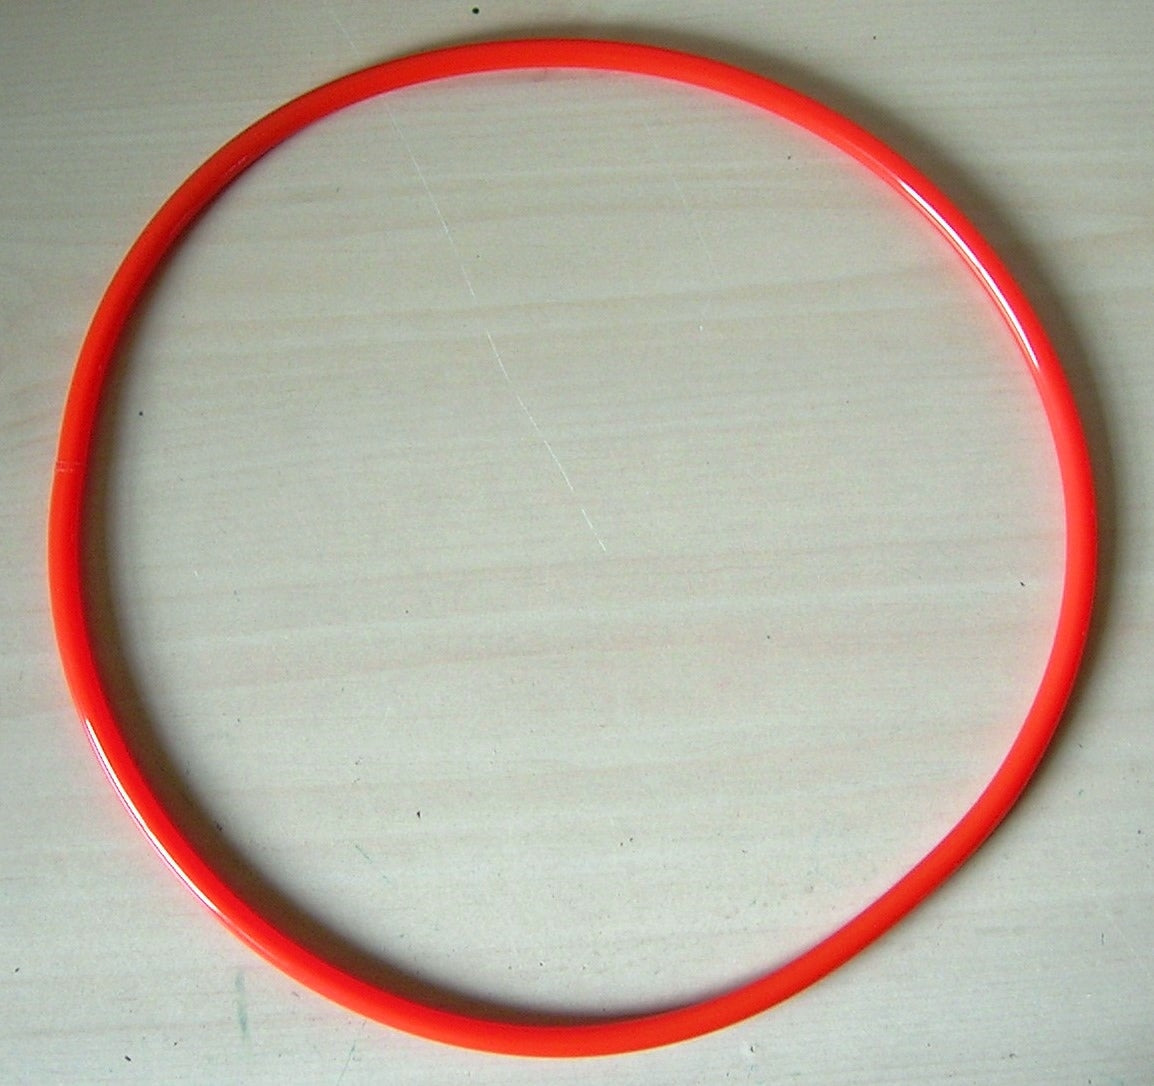 Urethane Round Replacement Belt for CENTRAL MACHINERY Model 1679 Mini Lathe